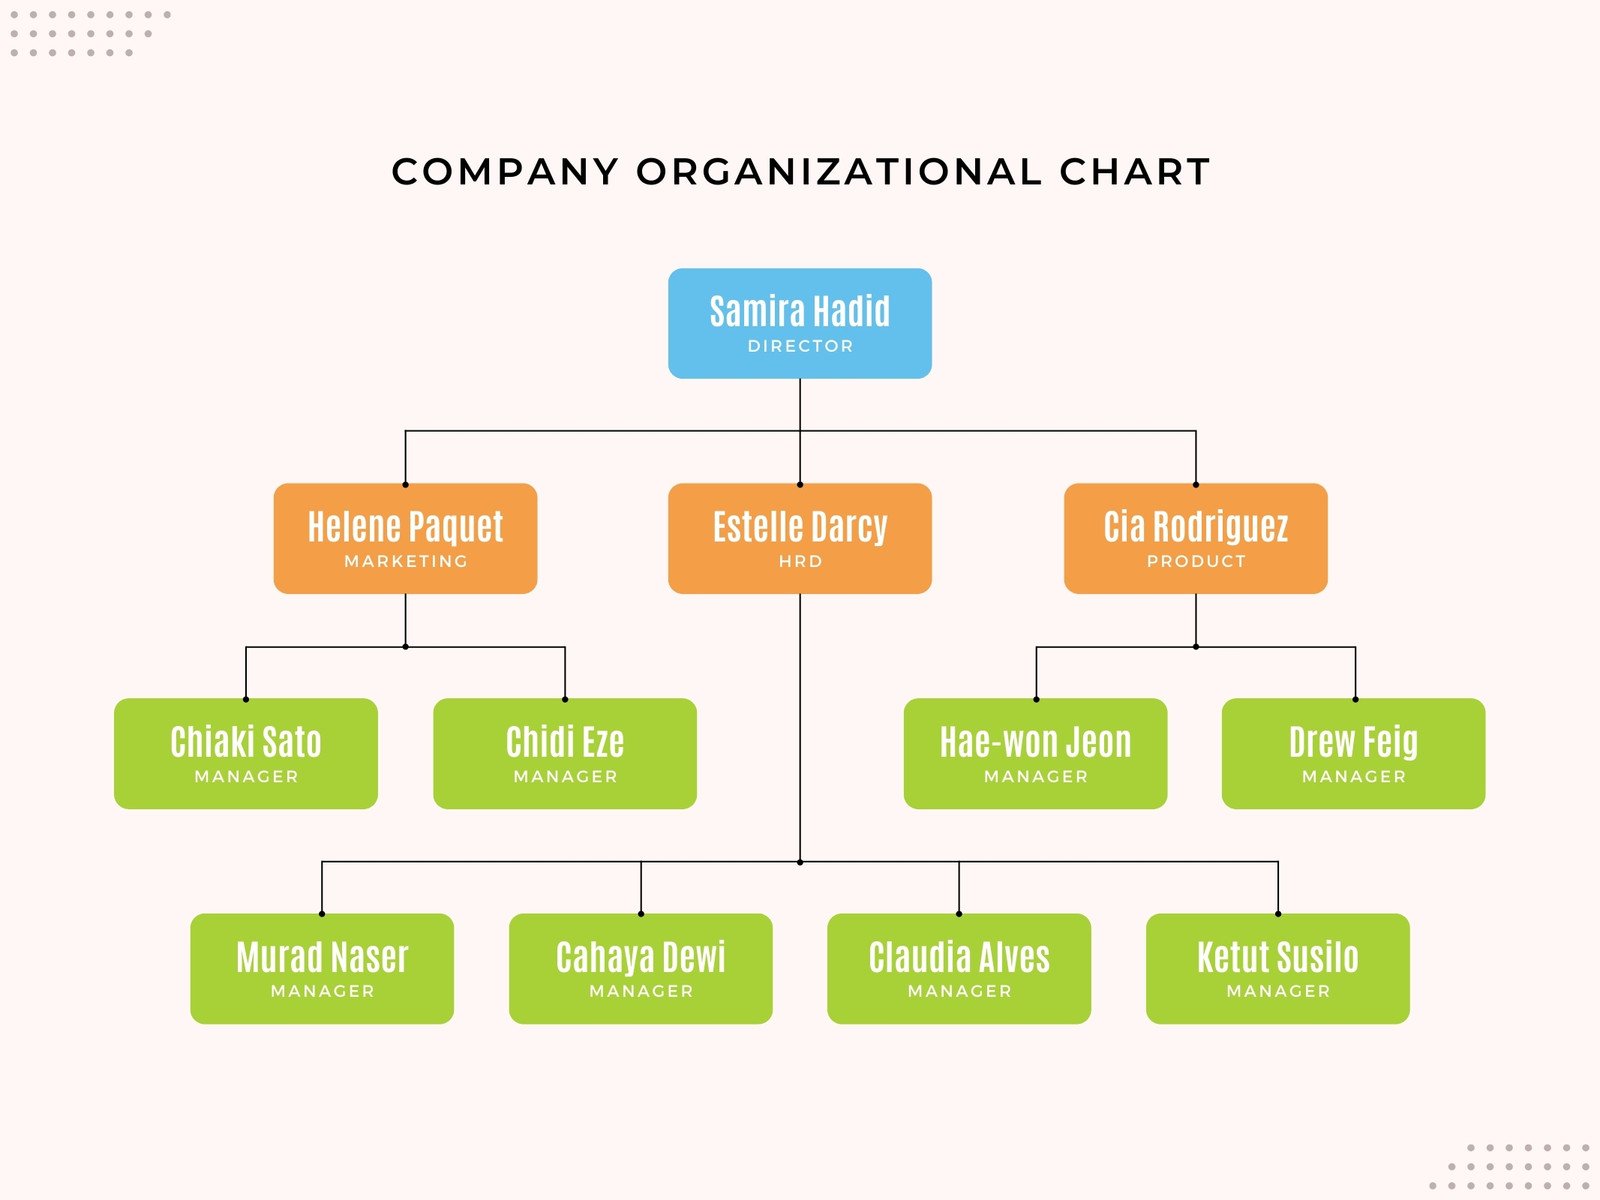 How to Develop an Organizational Structure Template for Your Company